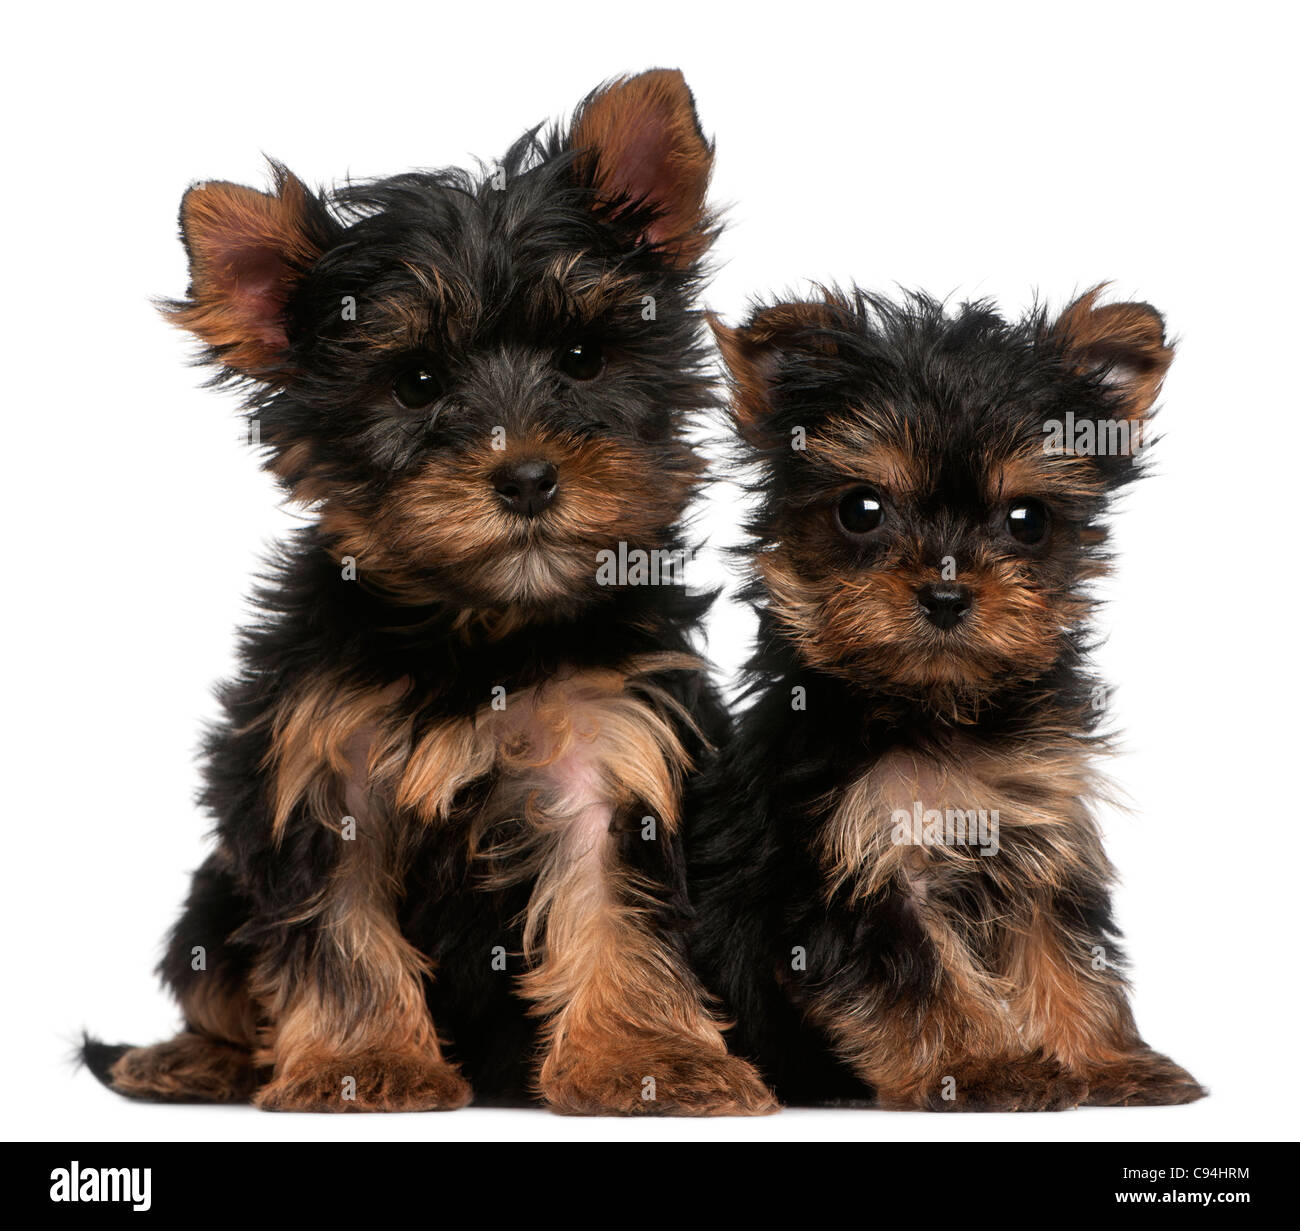 https://c8.alamy.com/comp/C94HRM/yorkshire-terrier-puppies-8-weeks-old-in-front-of-white-background-C94HRM.jpg